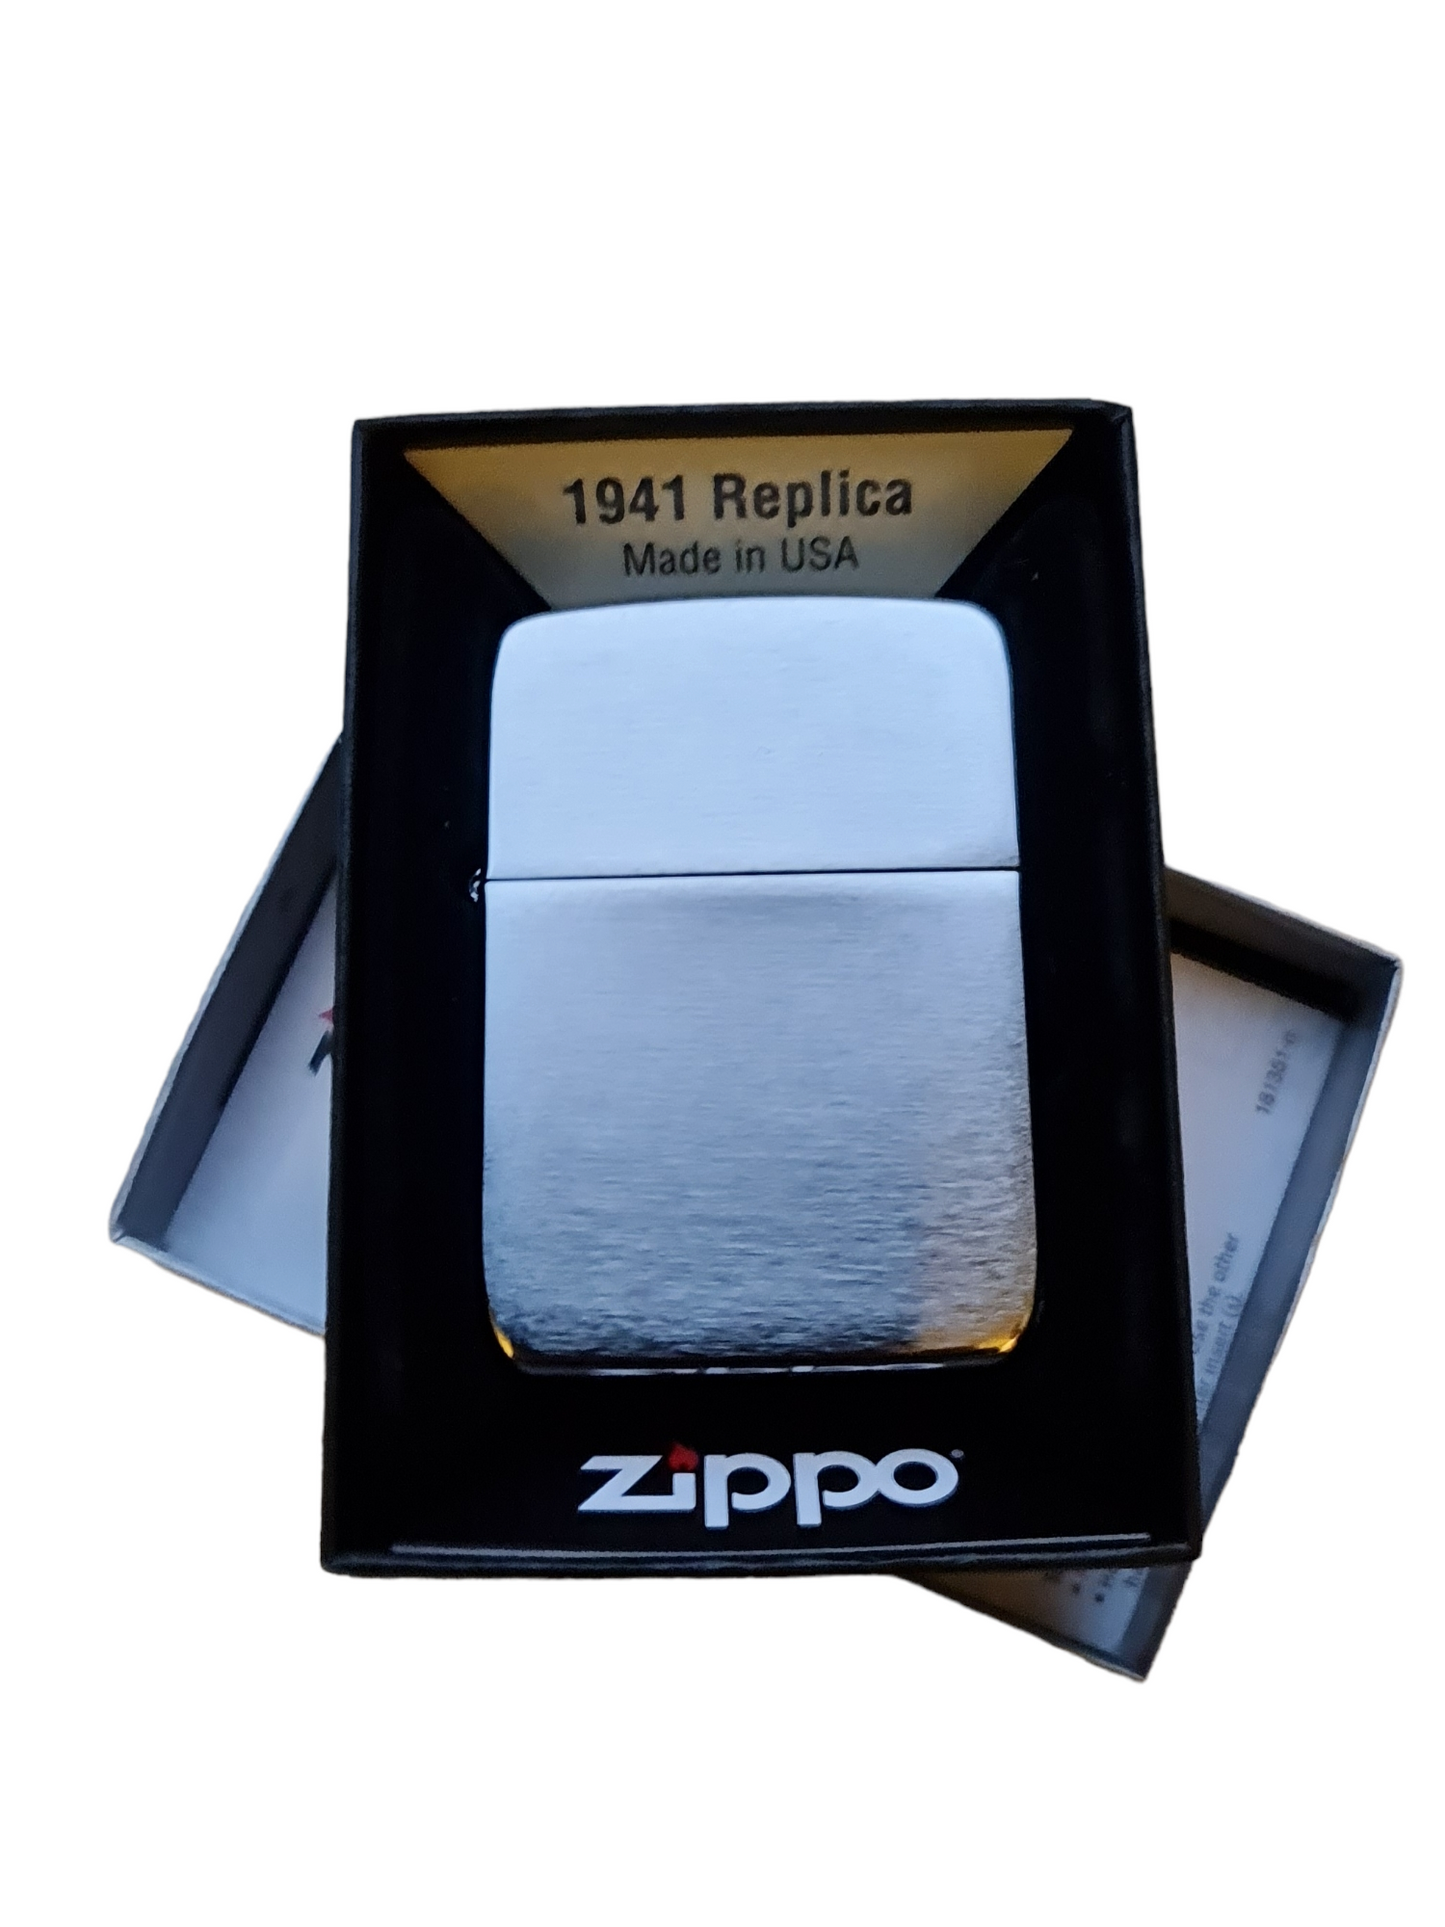 Personalised Engraved Zippo 1941 Replica Lighter - Vintage Chrome